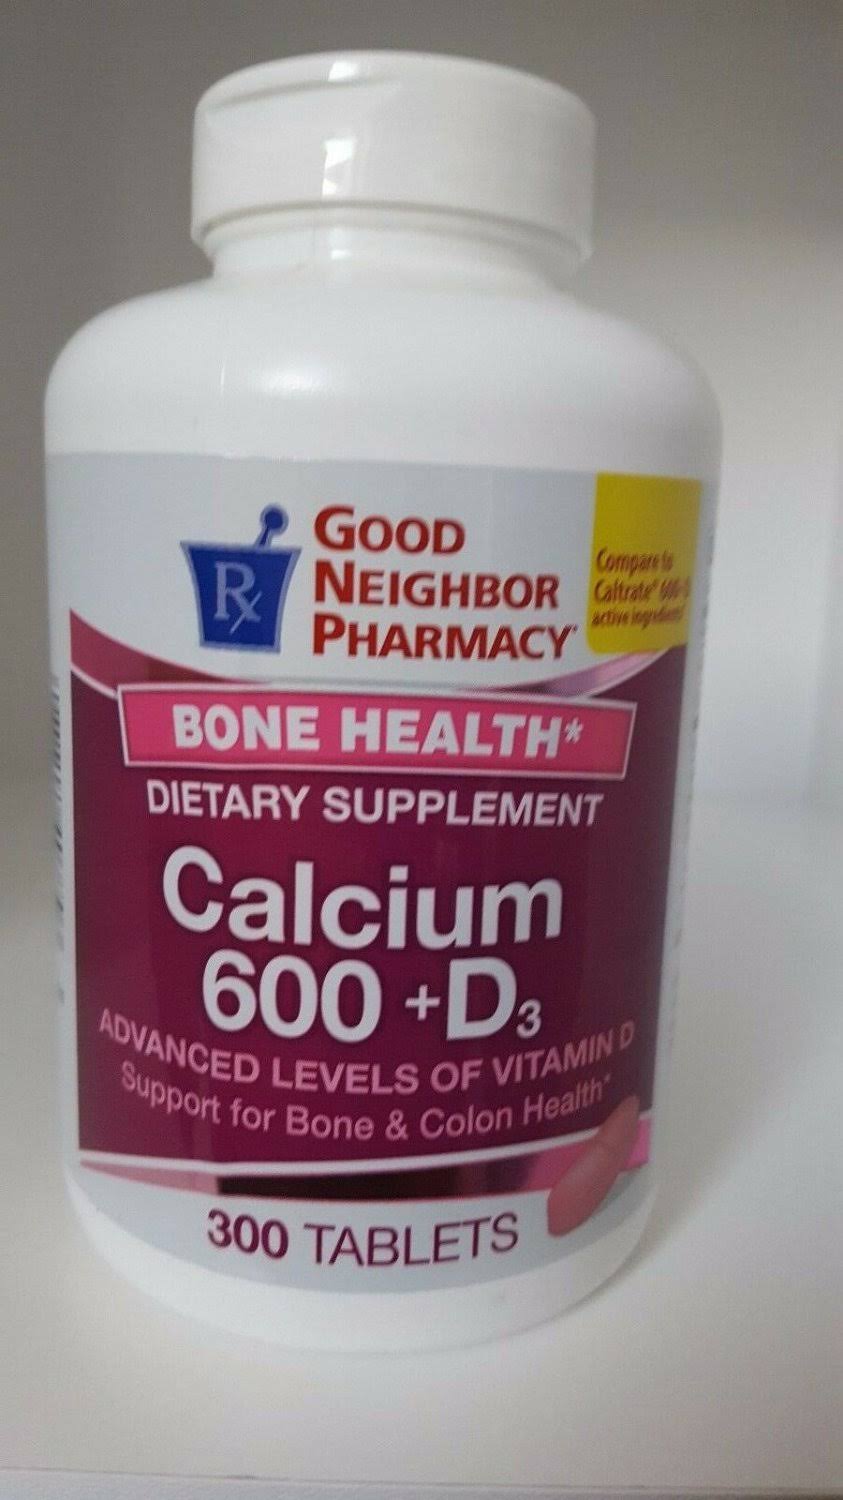 GNP Calcium +D 600 Mg 300 Tabs Advance level V-D Support for Bone & Colon Health